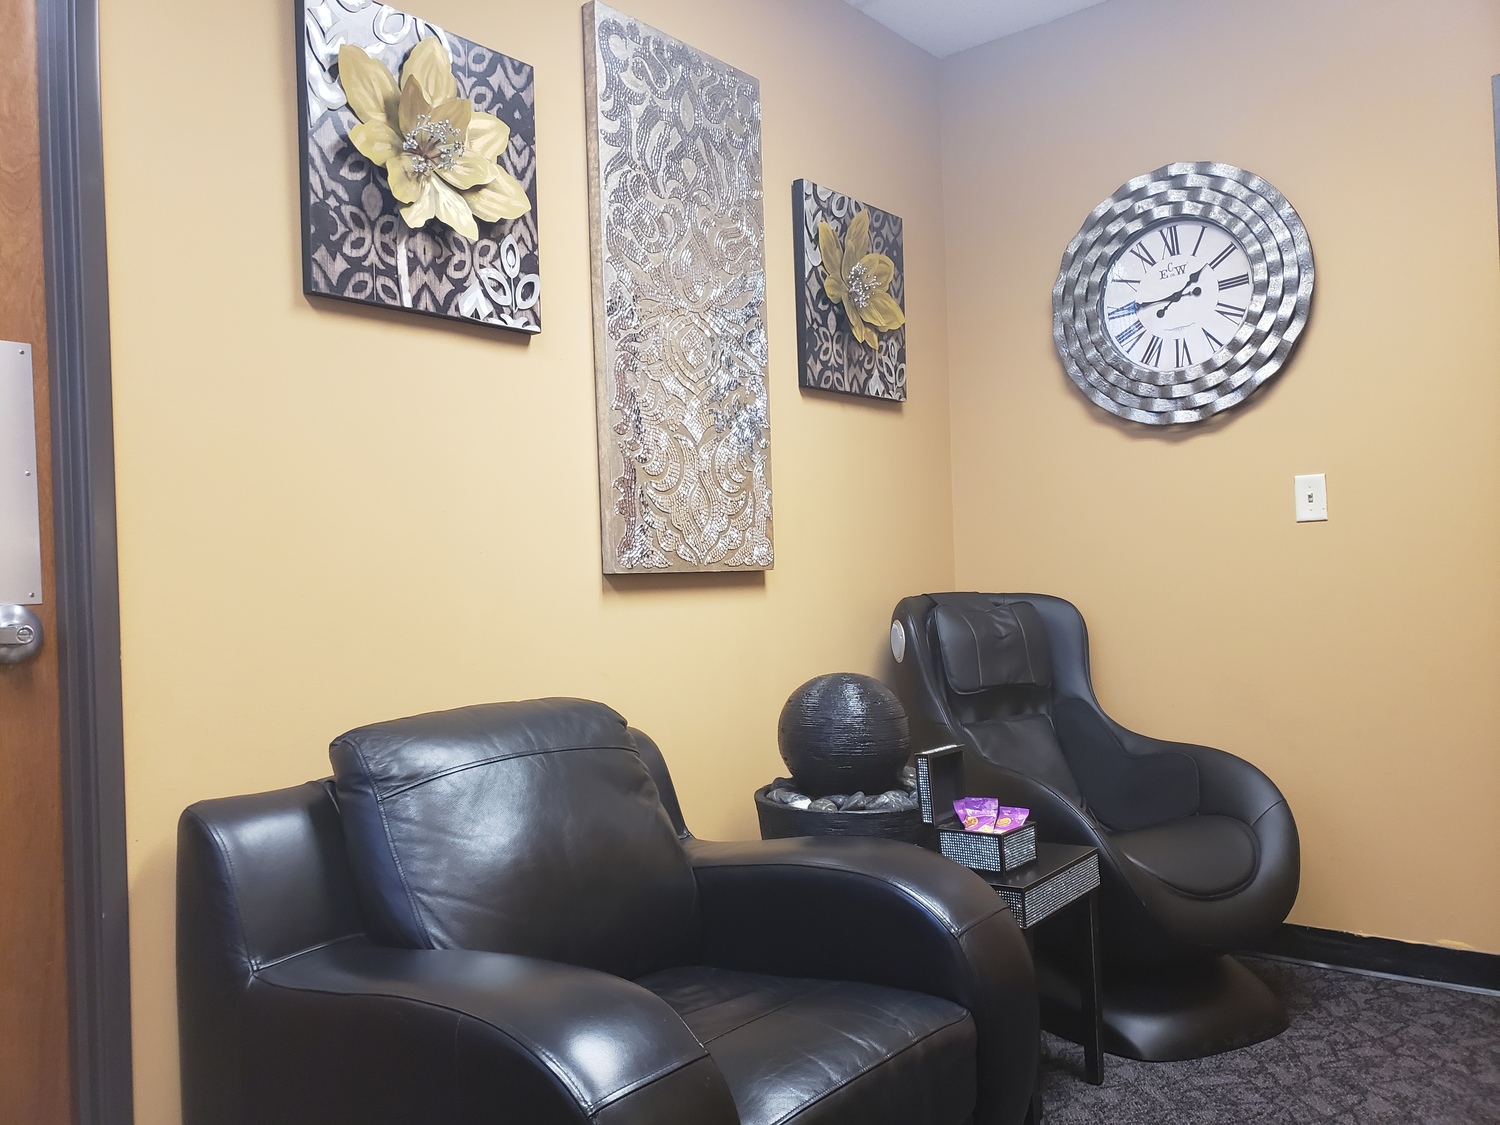 Gallery Photo of Sit in the massage chair and enjoy a FULL body massage to relax you while you wait